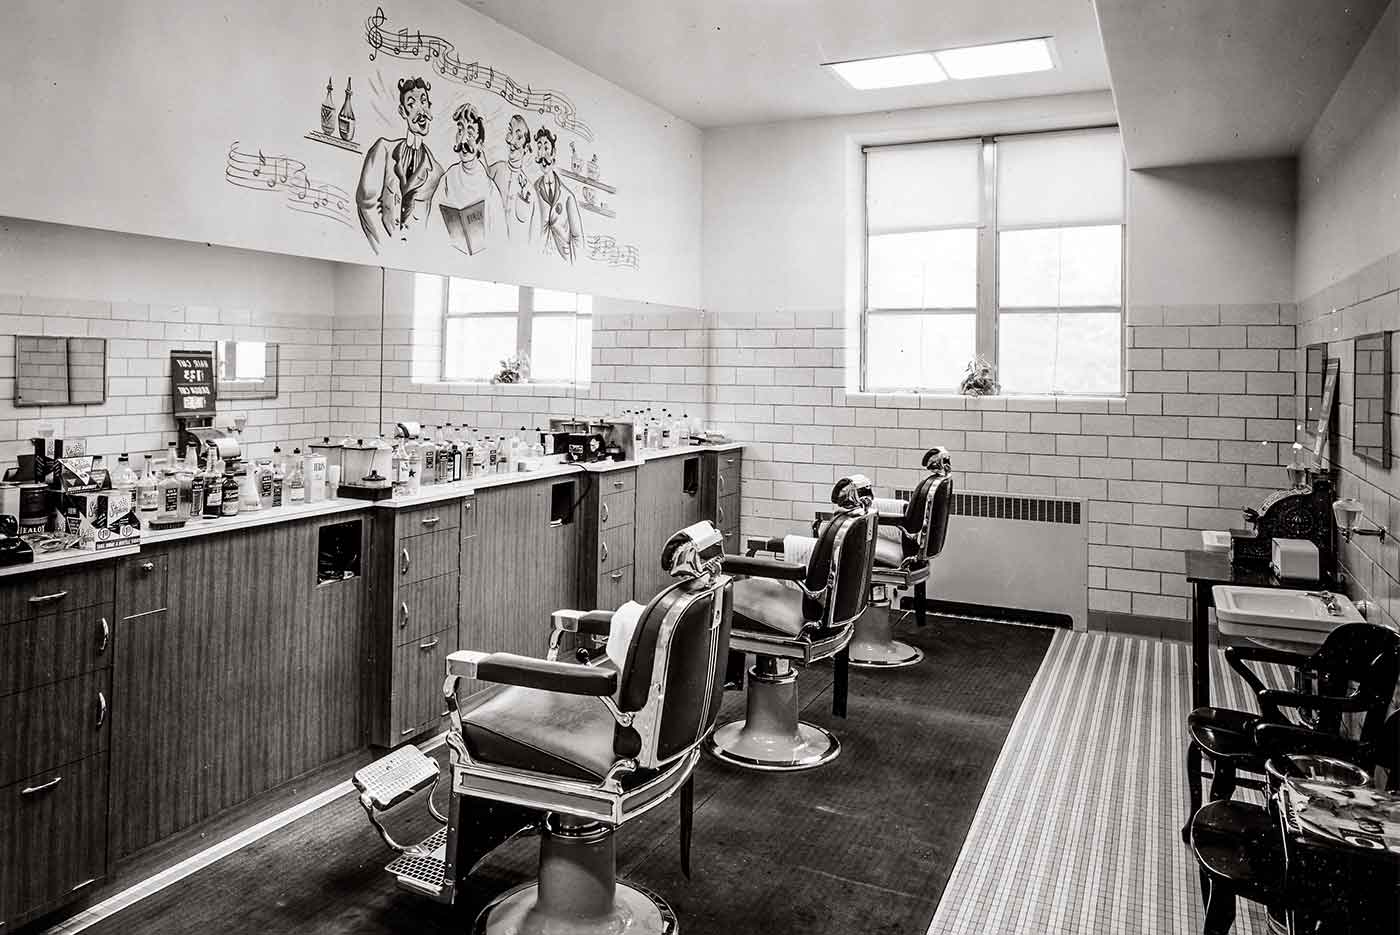 Vintage photo of the interior of the University Barber Shop